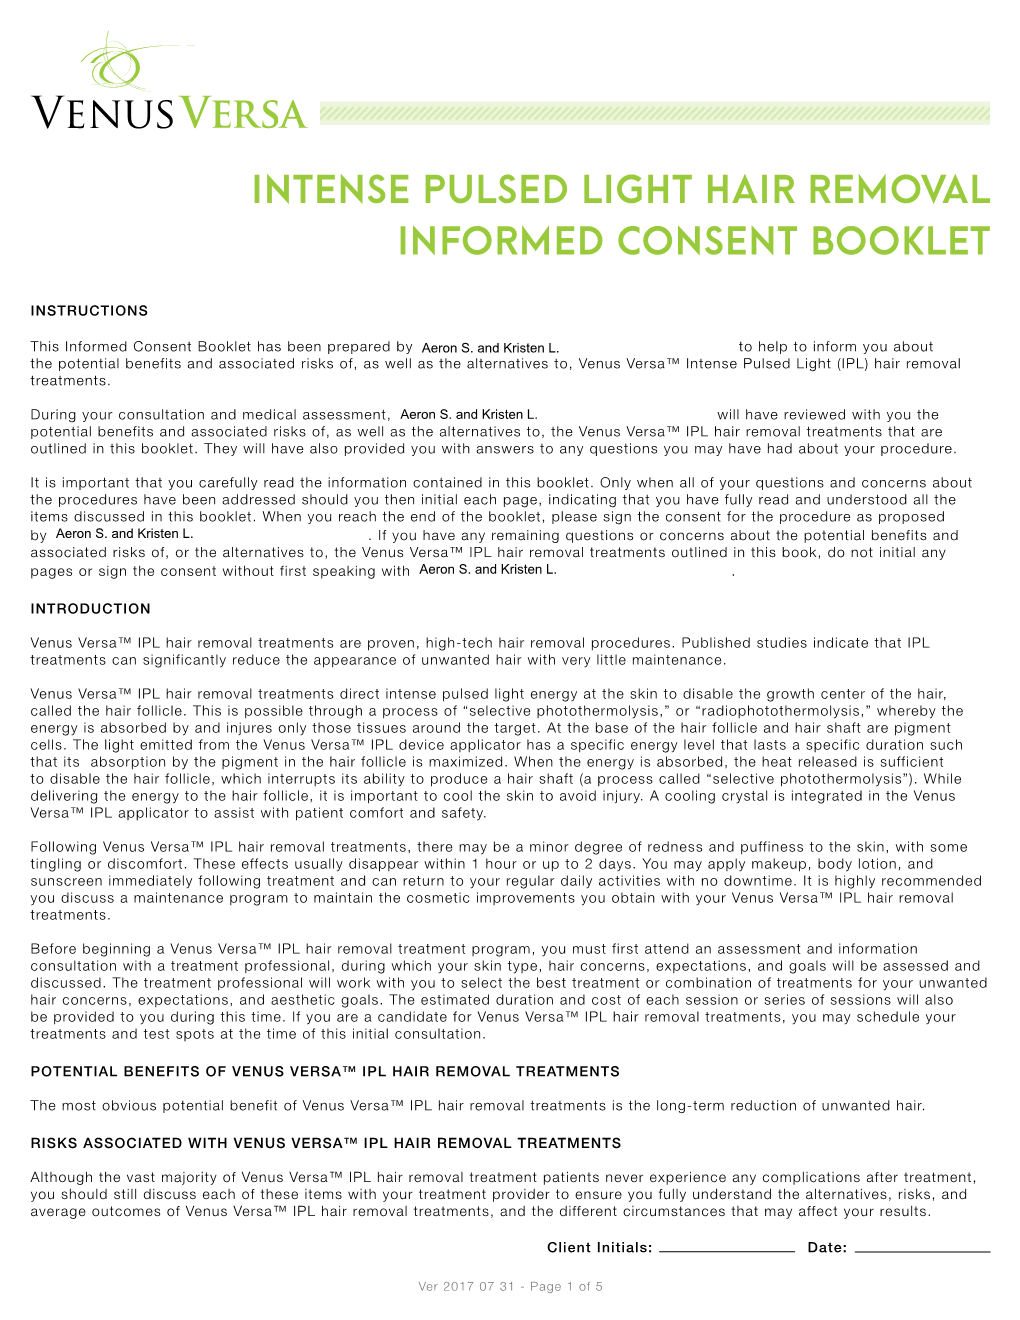 Intense Pulsed Light Hair Removal Informed Consent Booklet